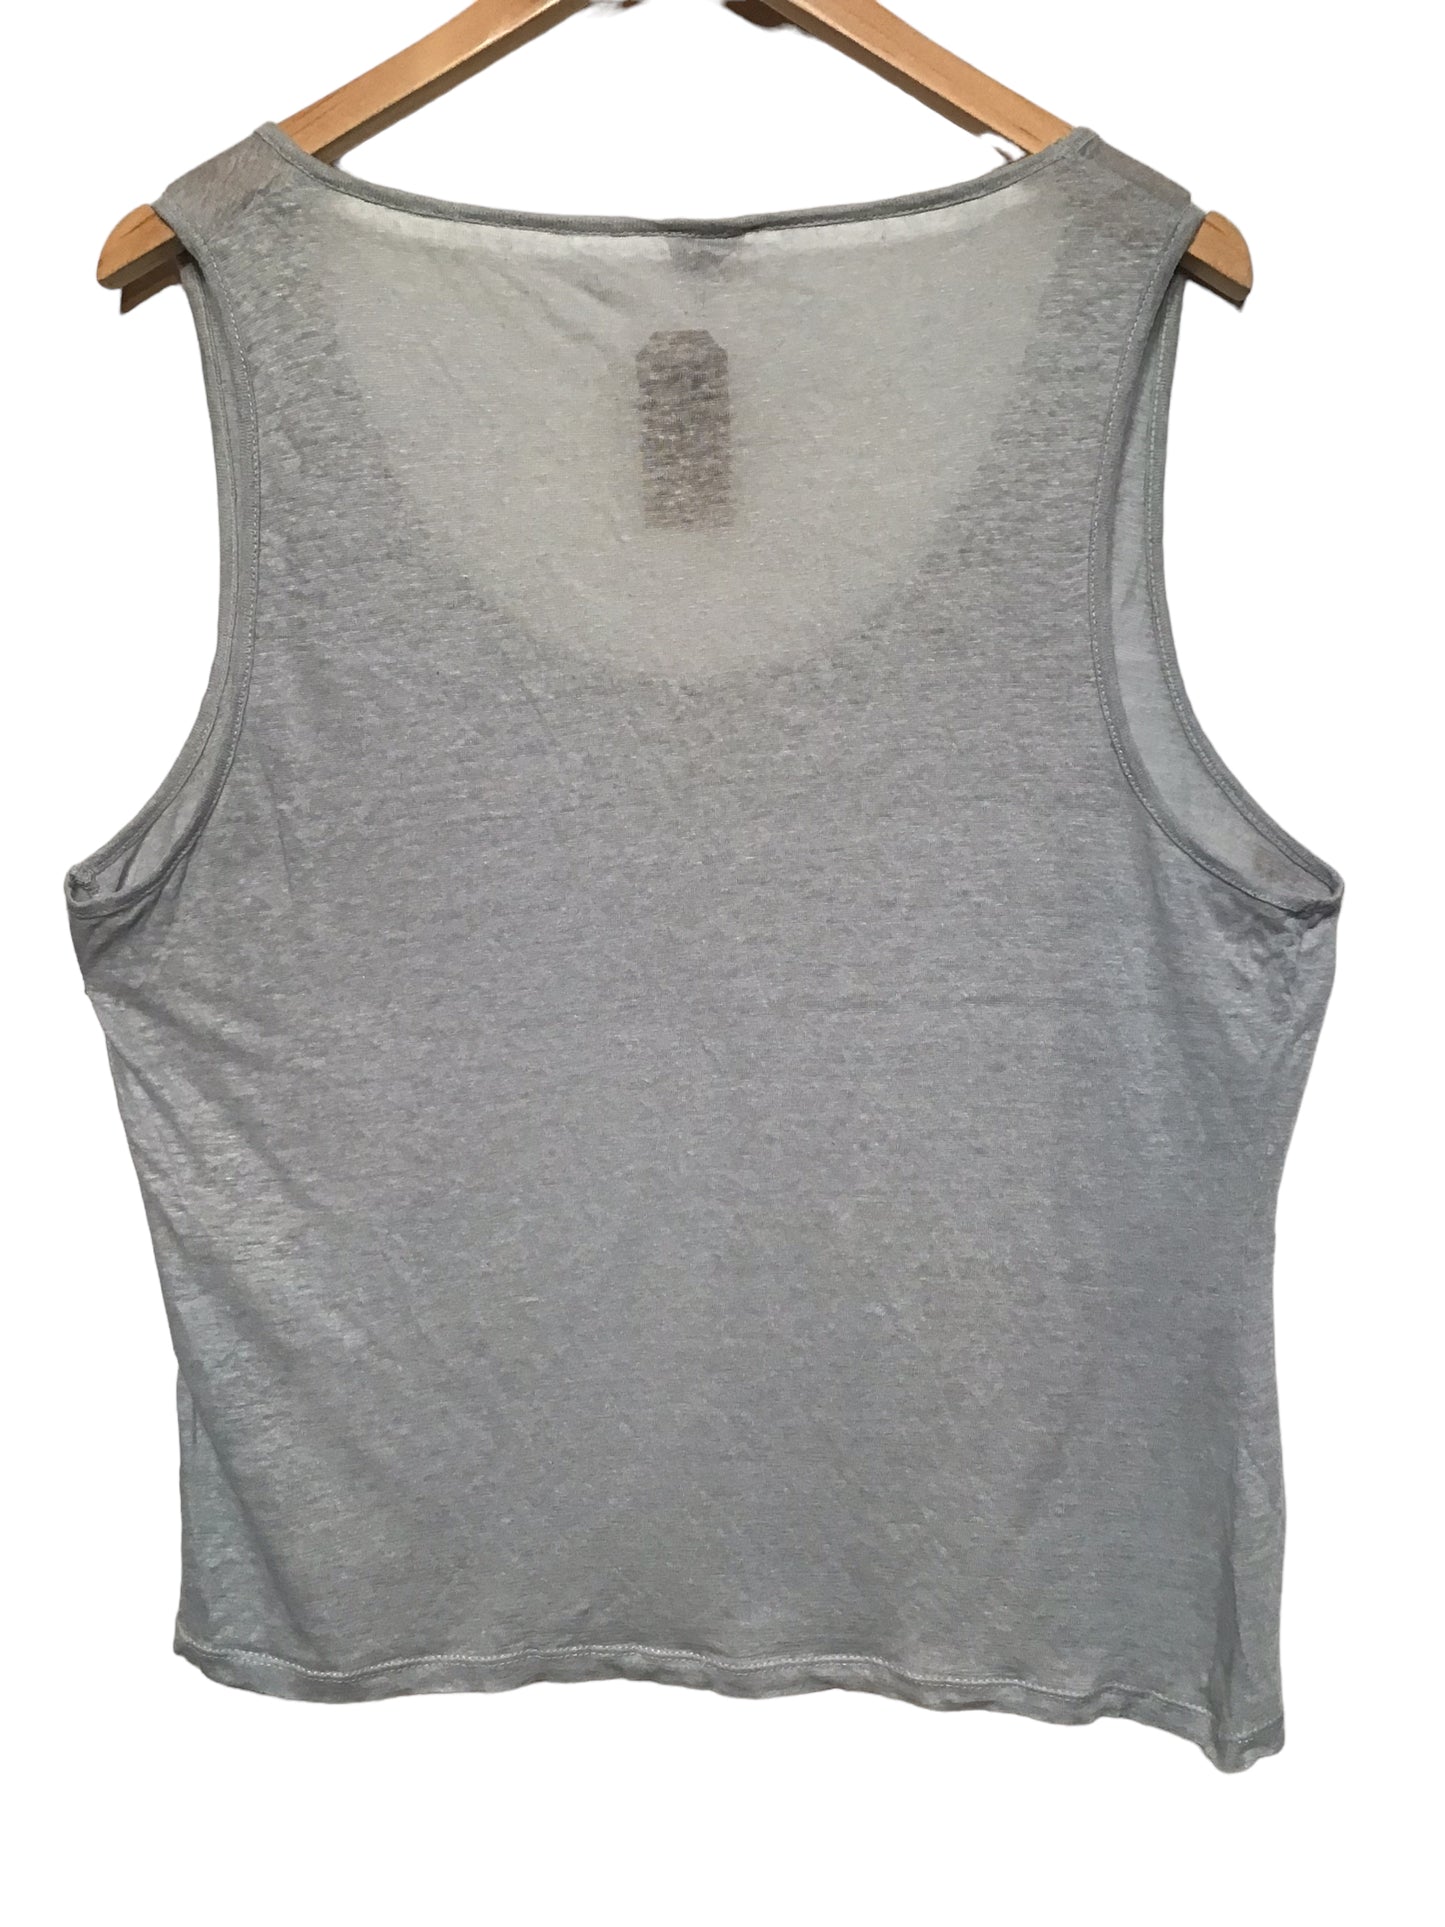 Poetry Sleeveless Top (Size XL)